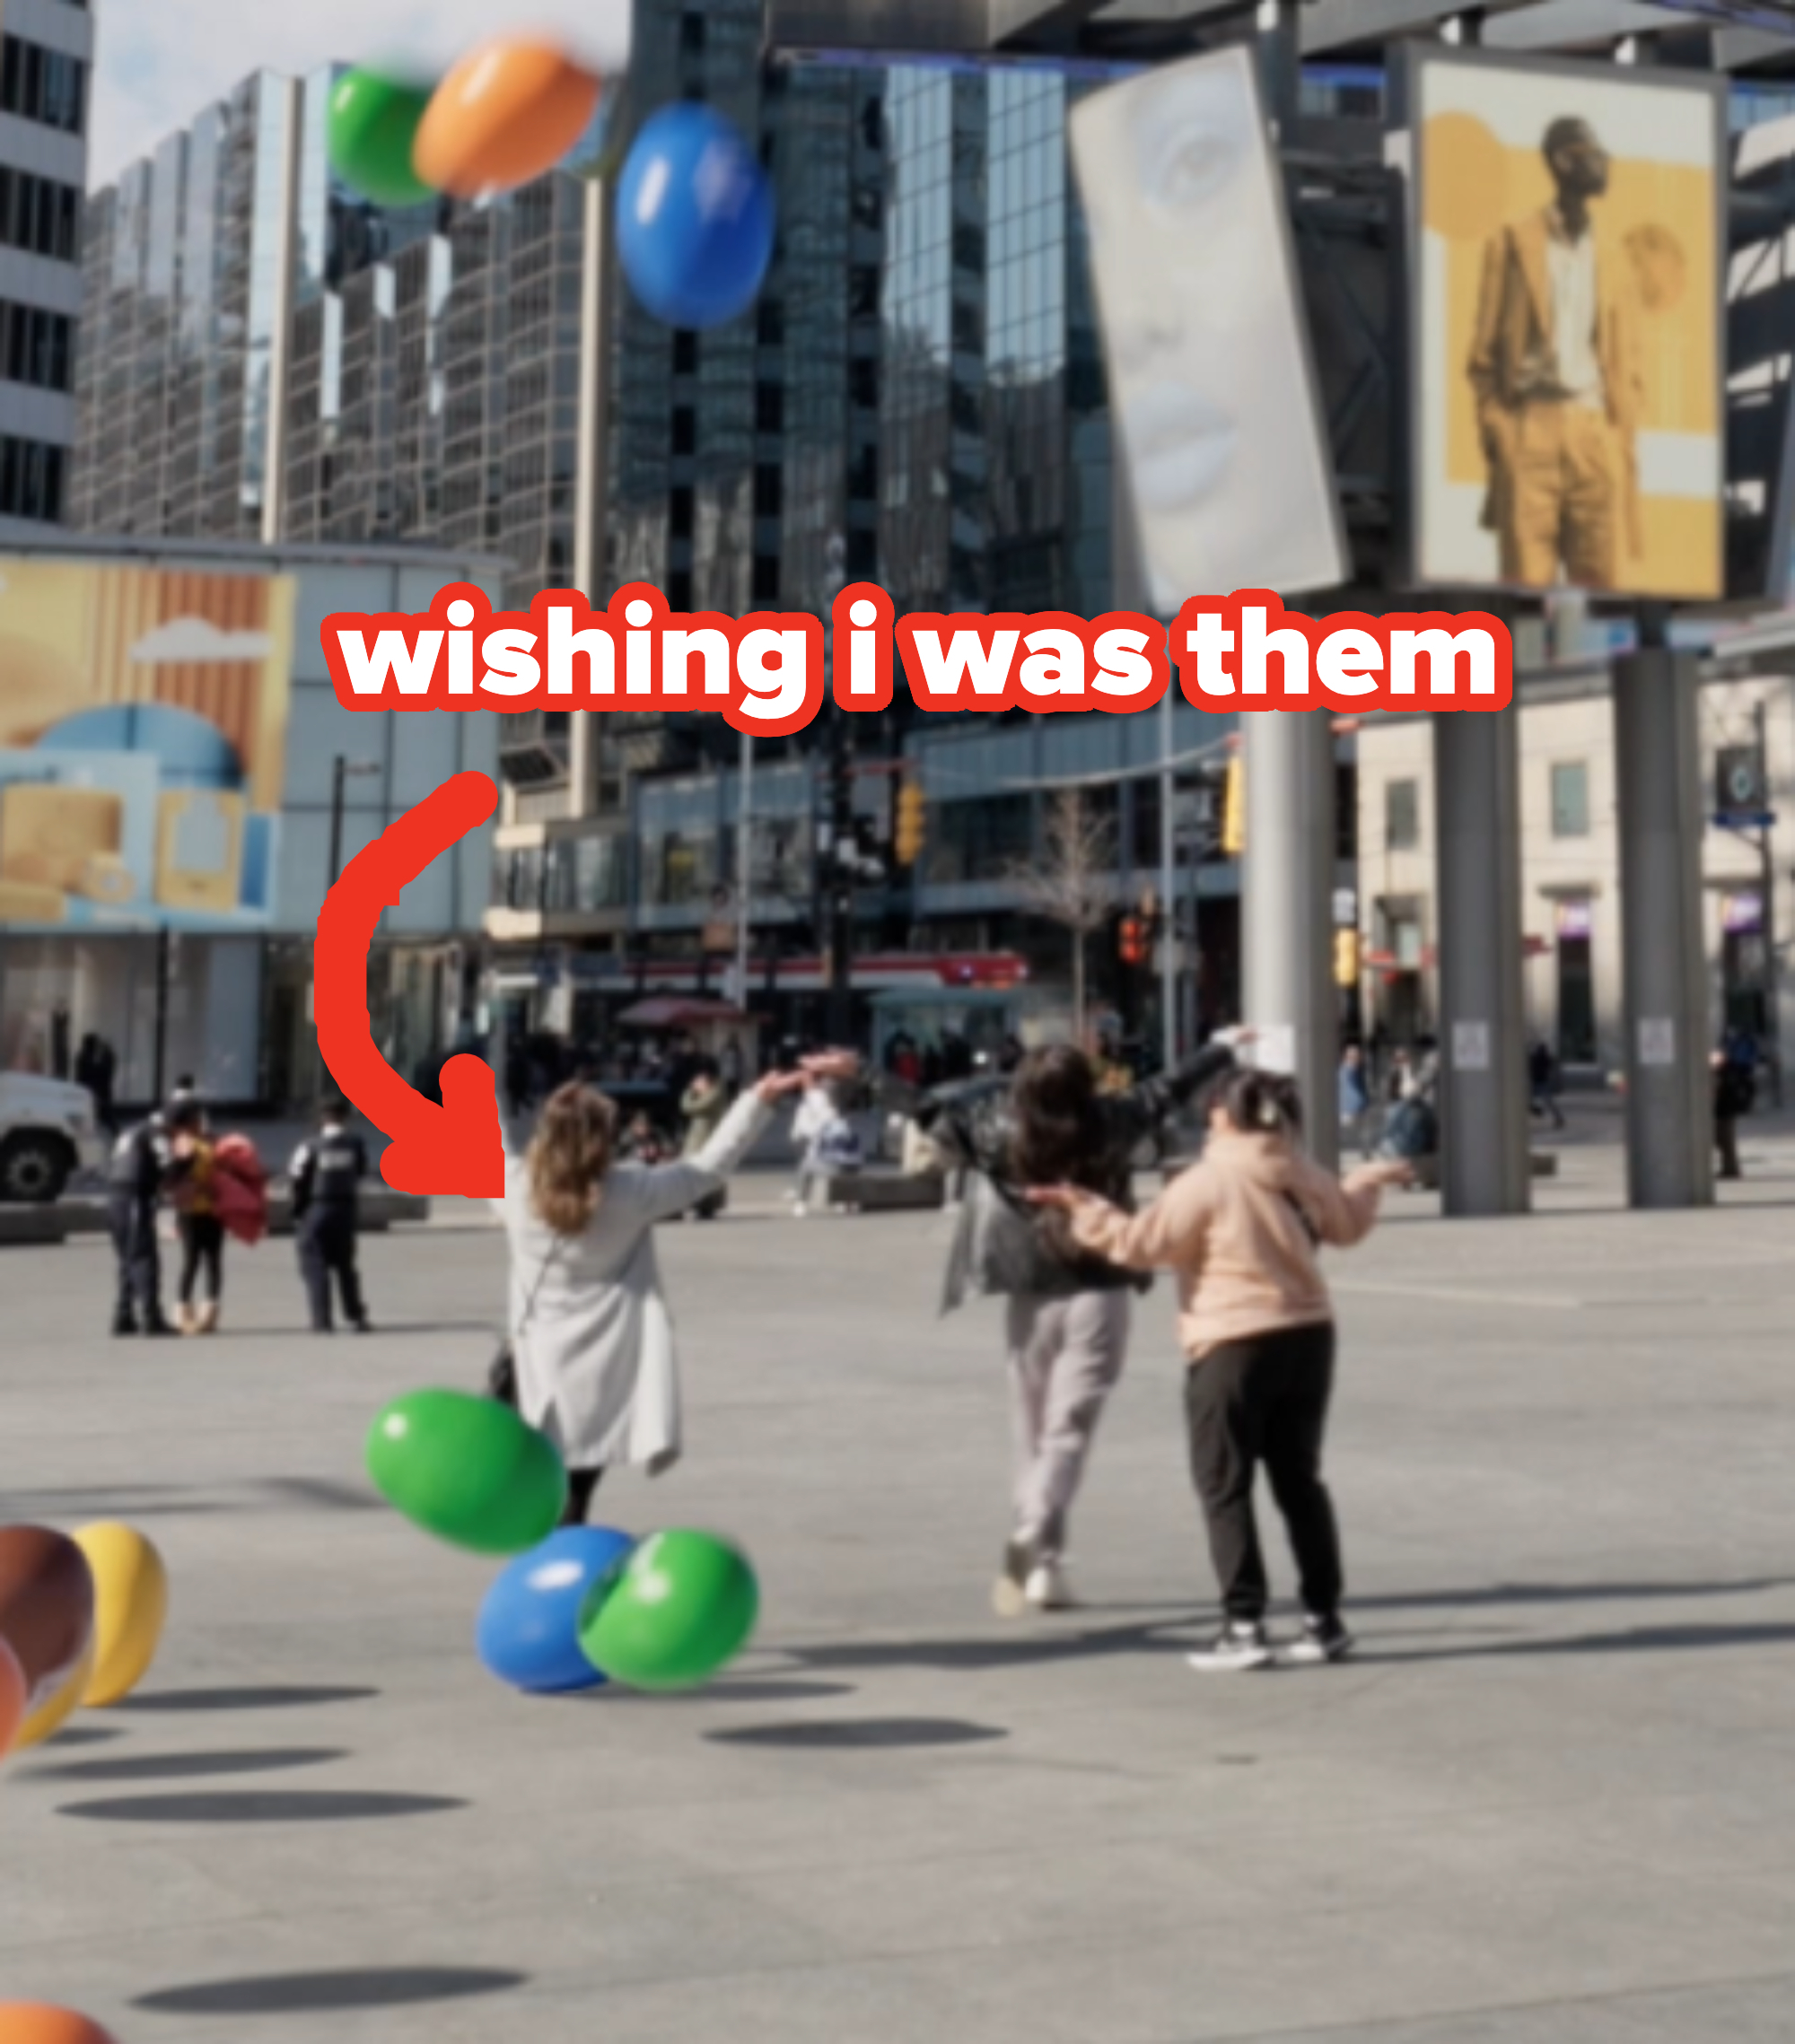 Text overlay says &quot;wishing i was them&quot; above a scene of people with giant M&amp;amp;M&#x27;S at a city square